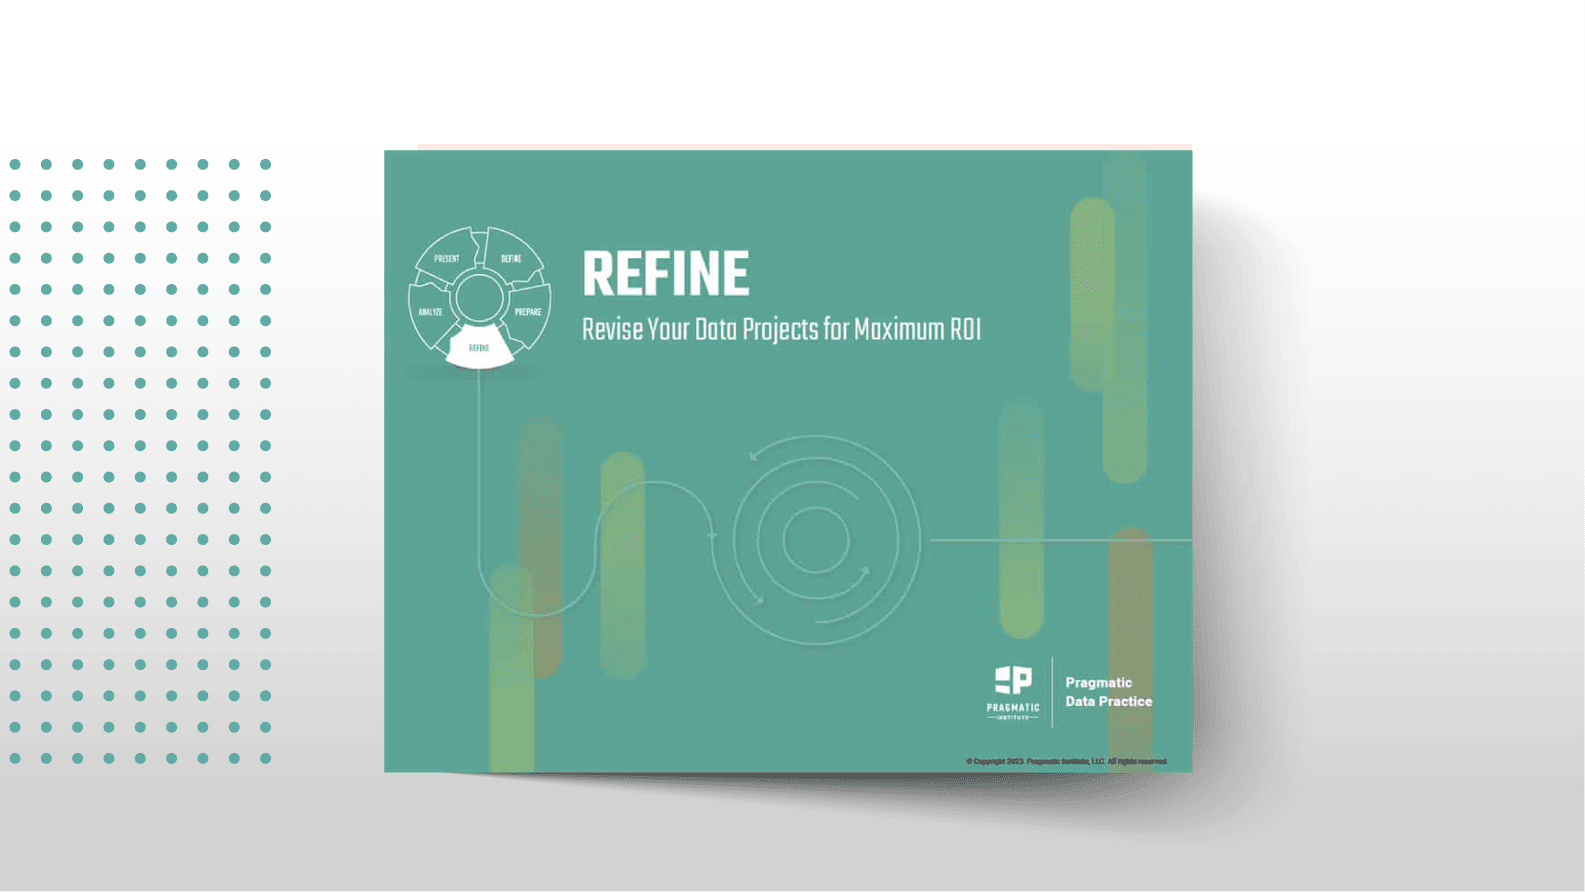 Refine: Revise Your Data Projects for Maximum ROI